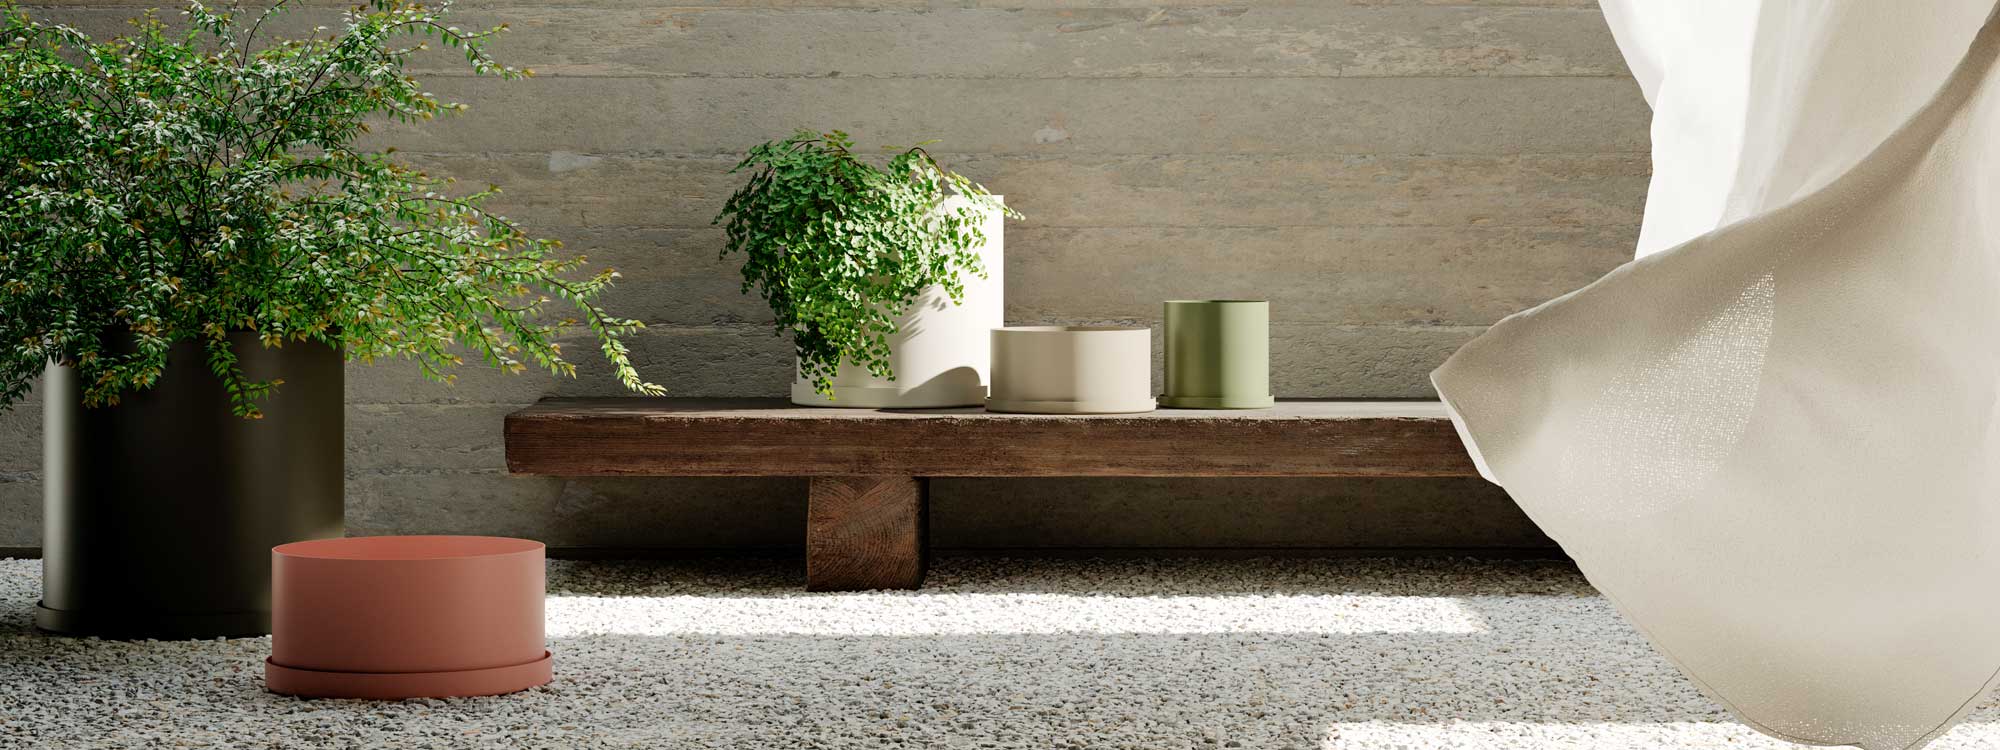 Image of OiSide OiPots minimalist planters in different shapes, sizes and colors, shown on white gravel and wooden bench in the backgroun